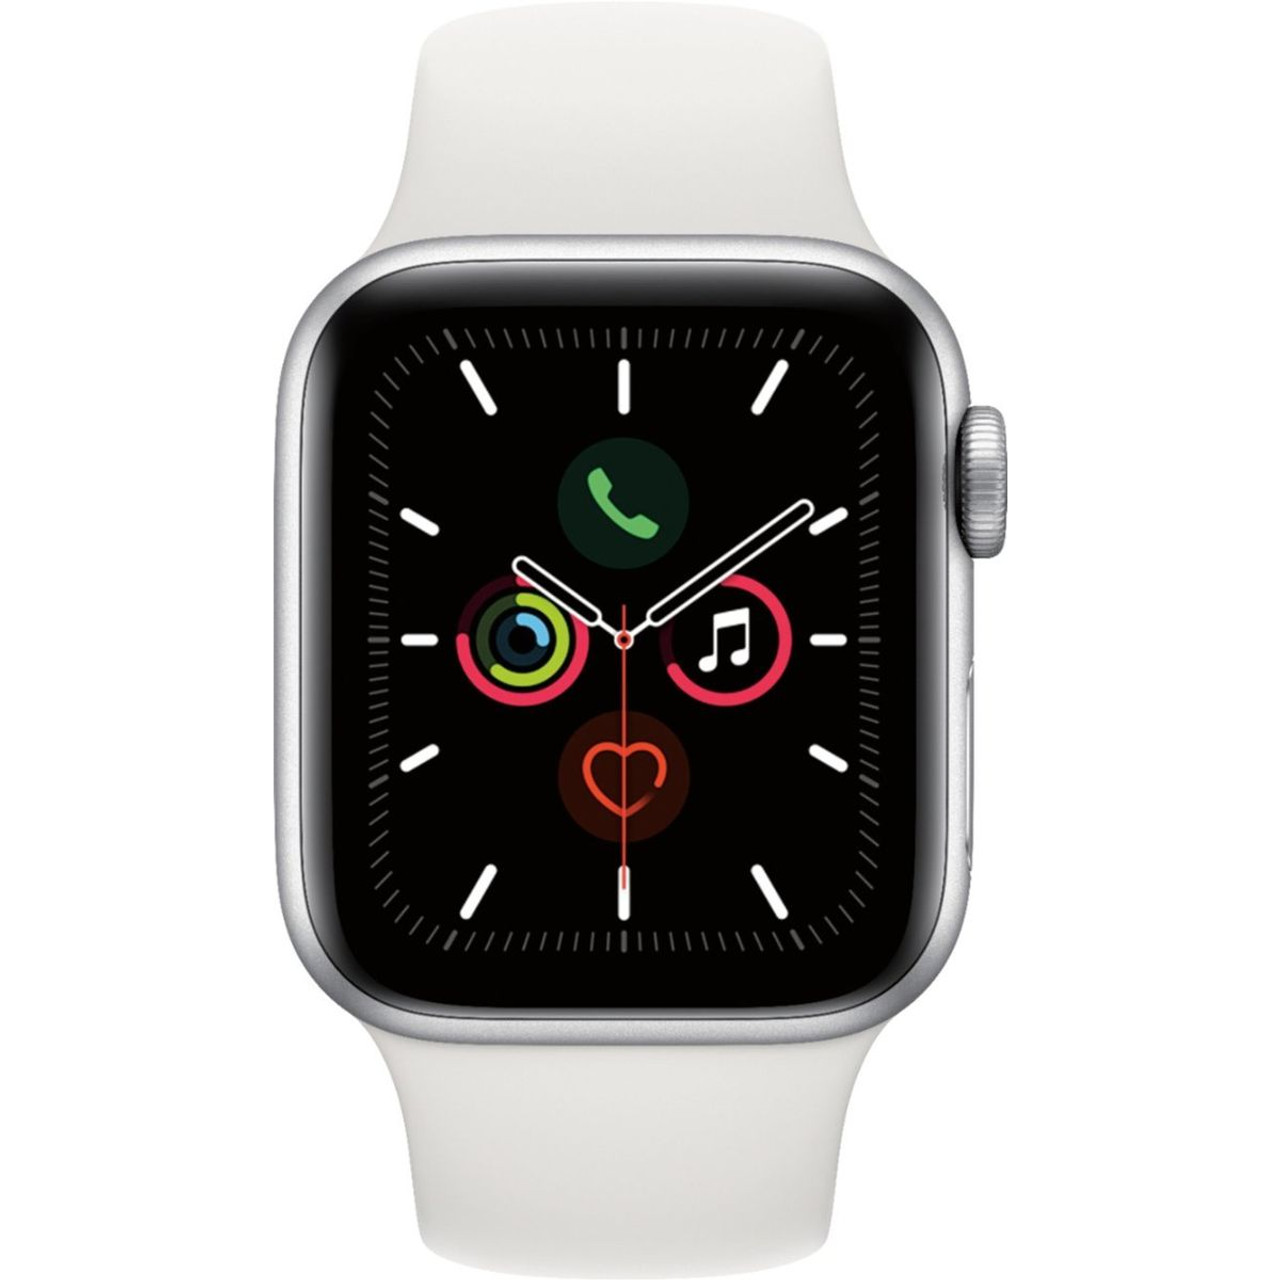 Apple Watch Series 5 with Silver Aluminum Case (40MM) product image